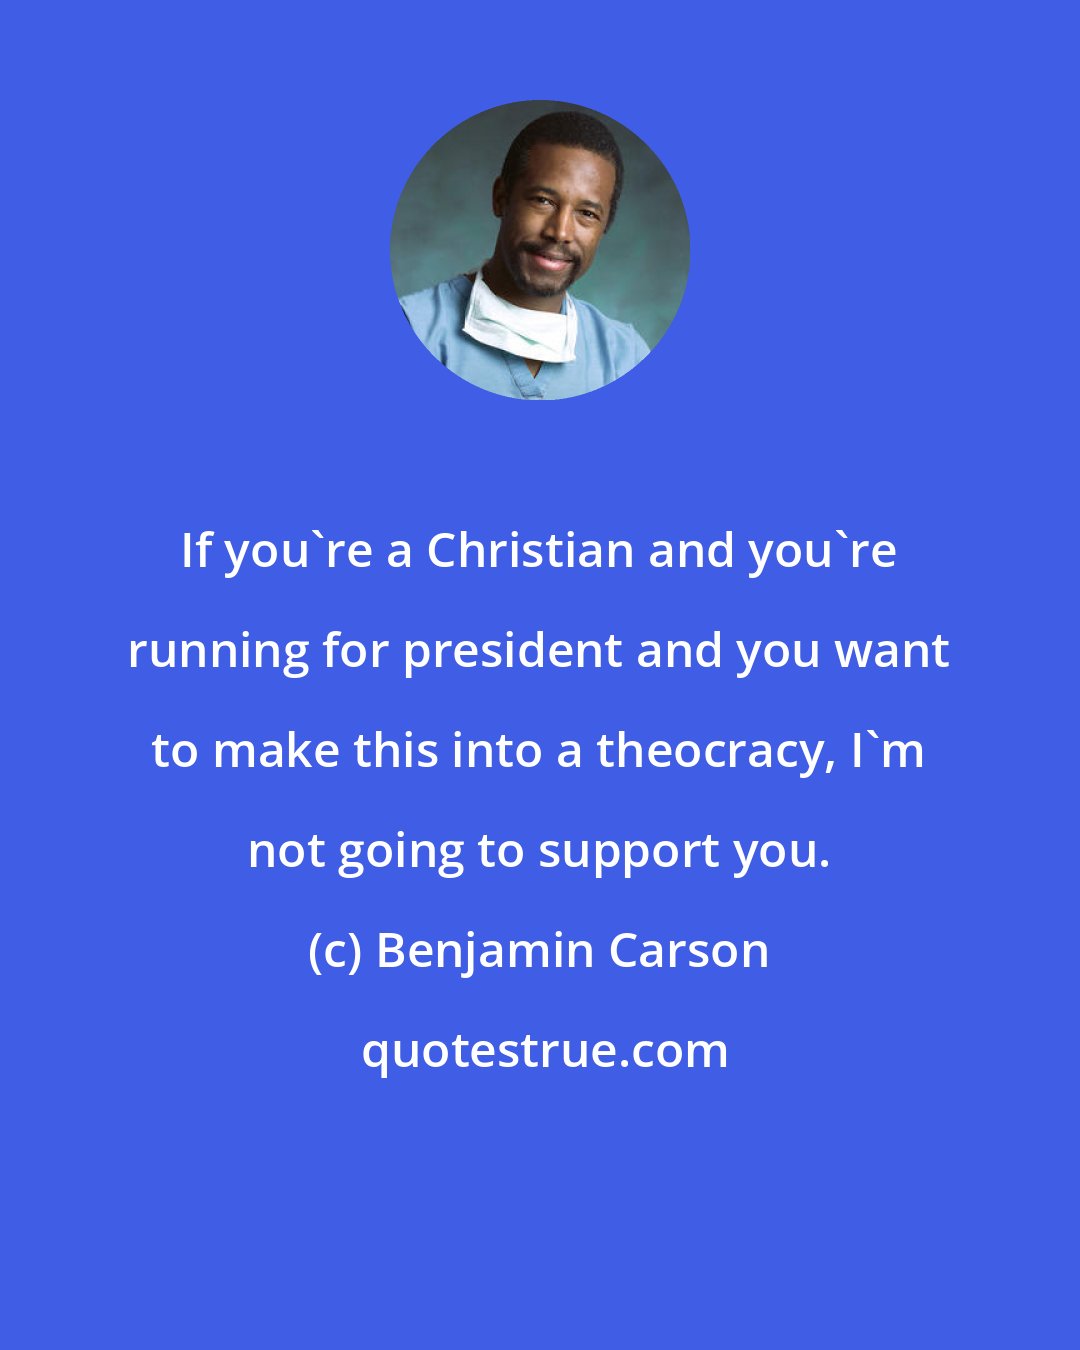 Benjamin Carson: If you're a Christian and you're running for president and you want to make this into a theocracy, I'm not going to support you.